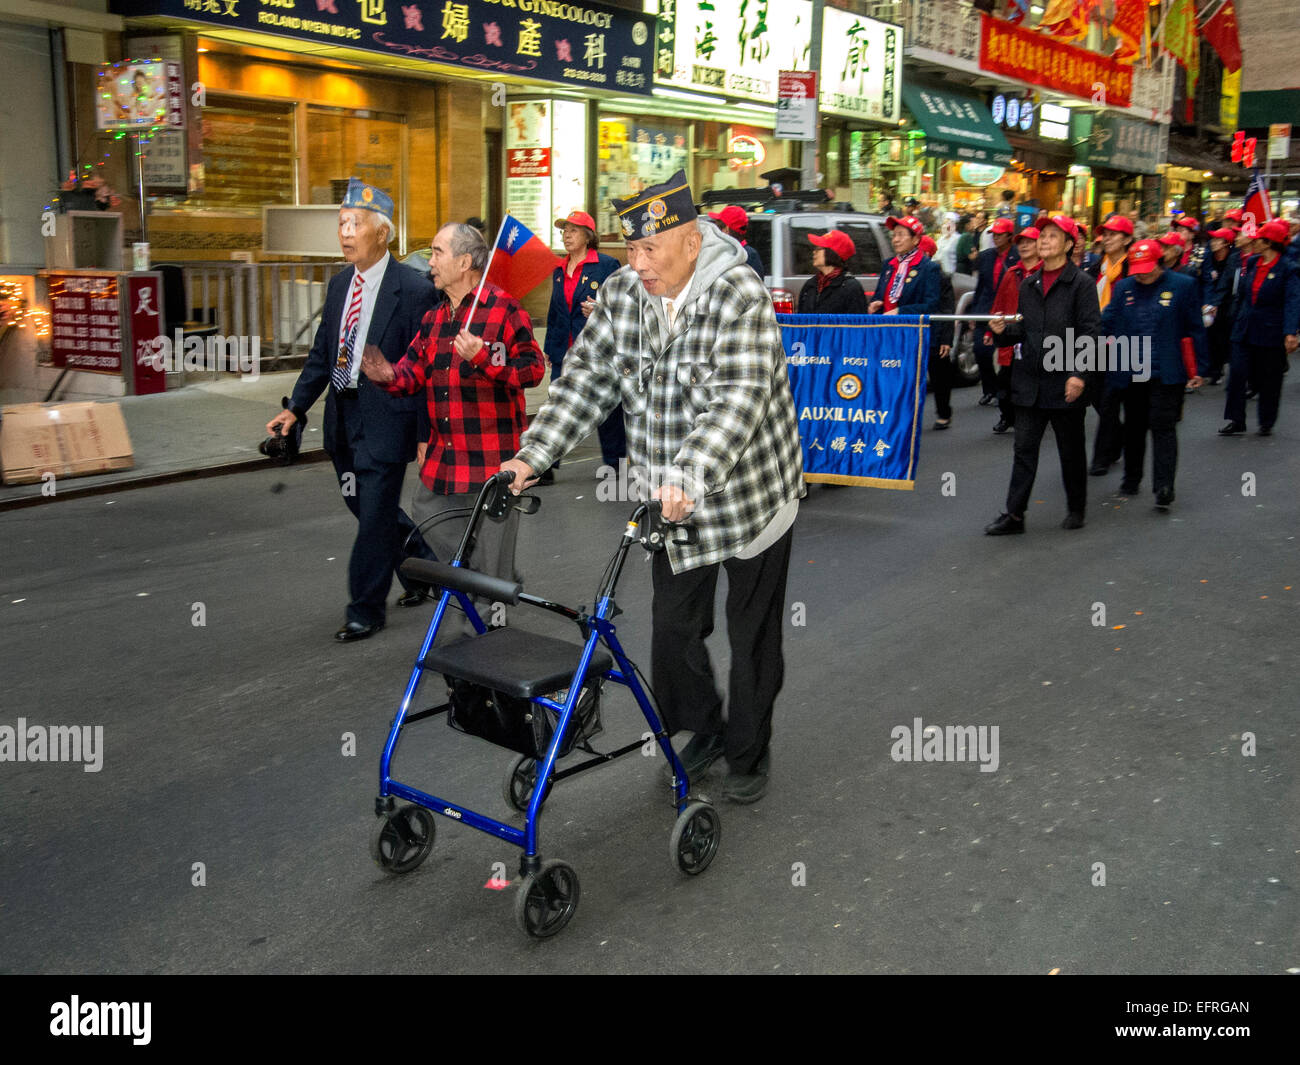 Wearing his American Legion cap, an elderly Chinese war veteran marches in a parade on Bayard Street in New York City Chinatown Stock Photo